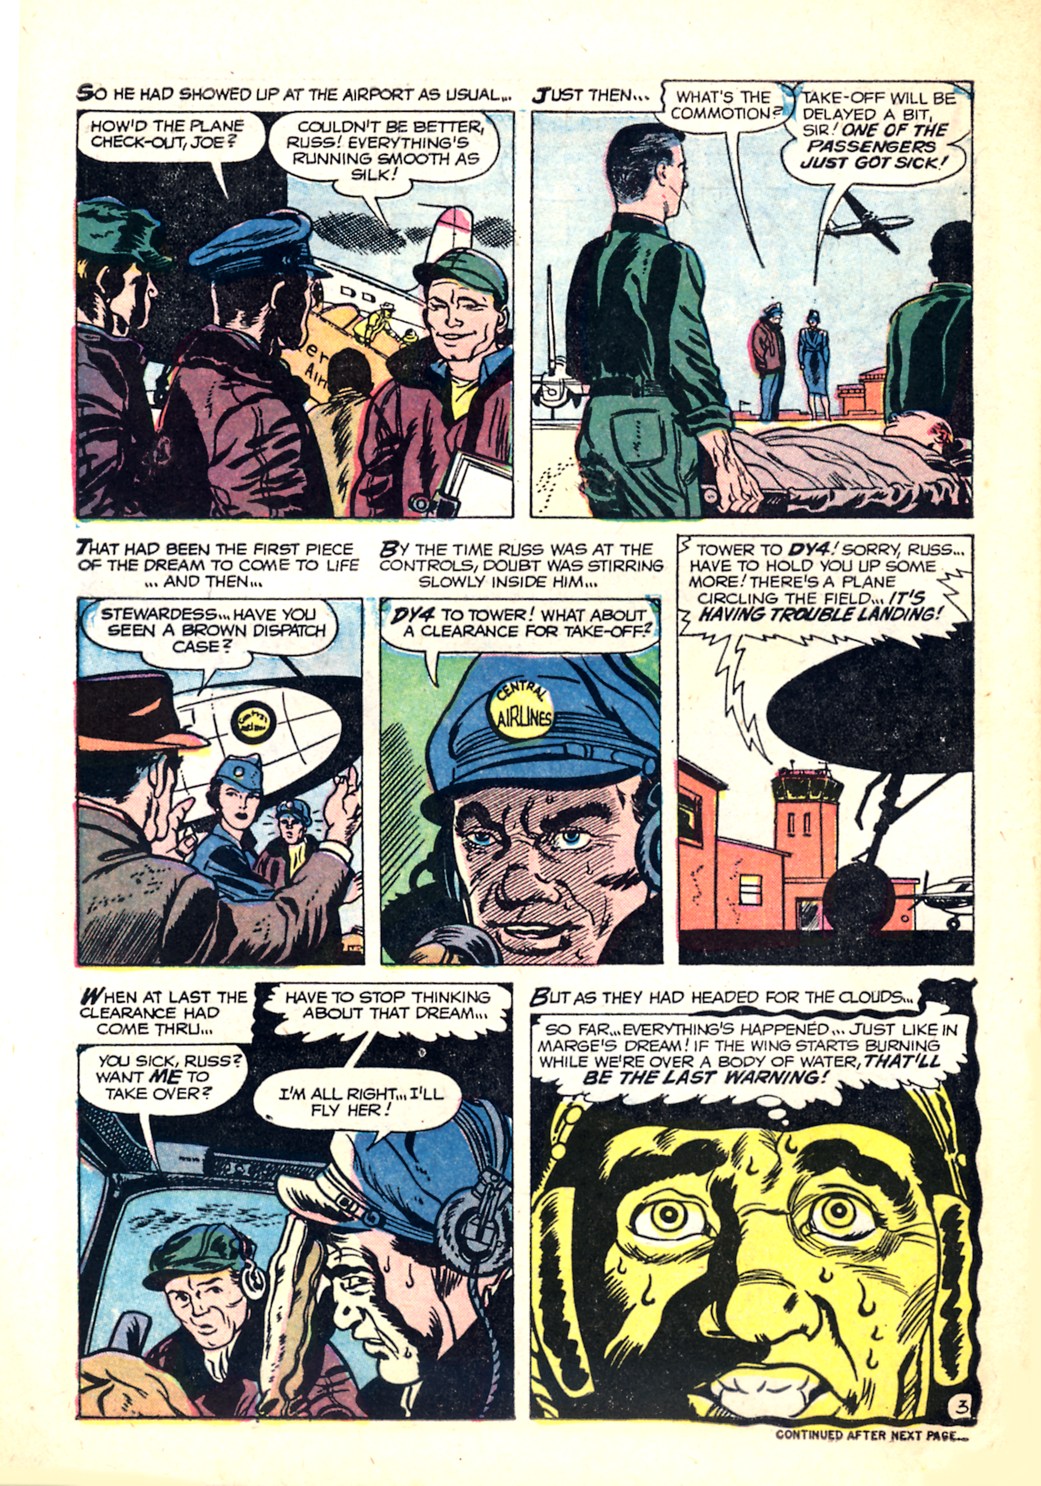 Marvel Tales (1949) 149 Page 9